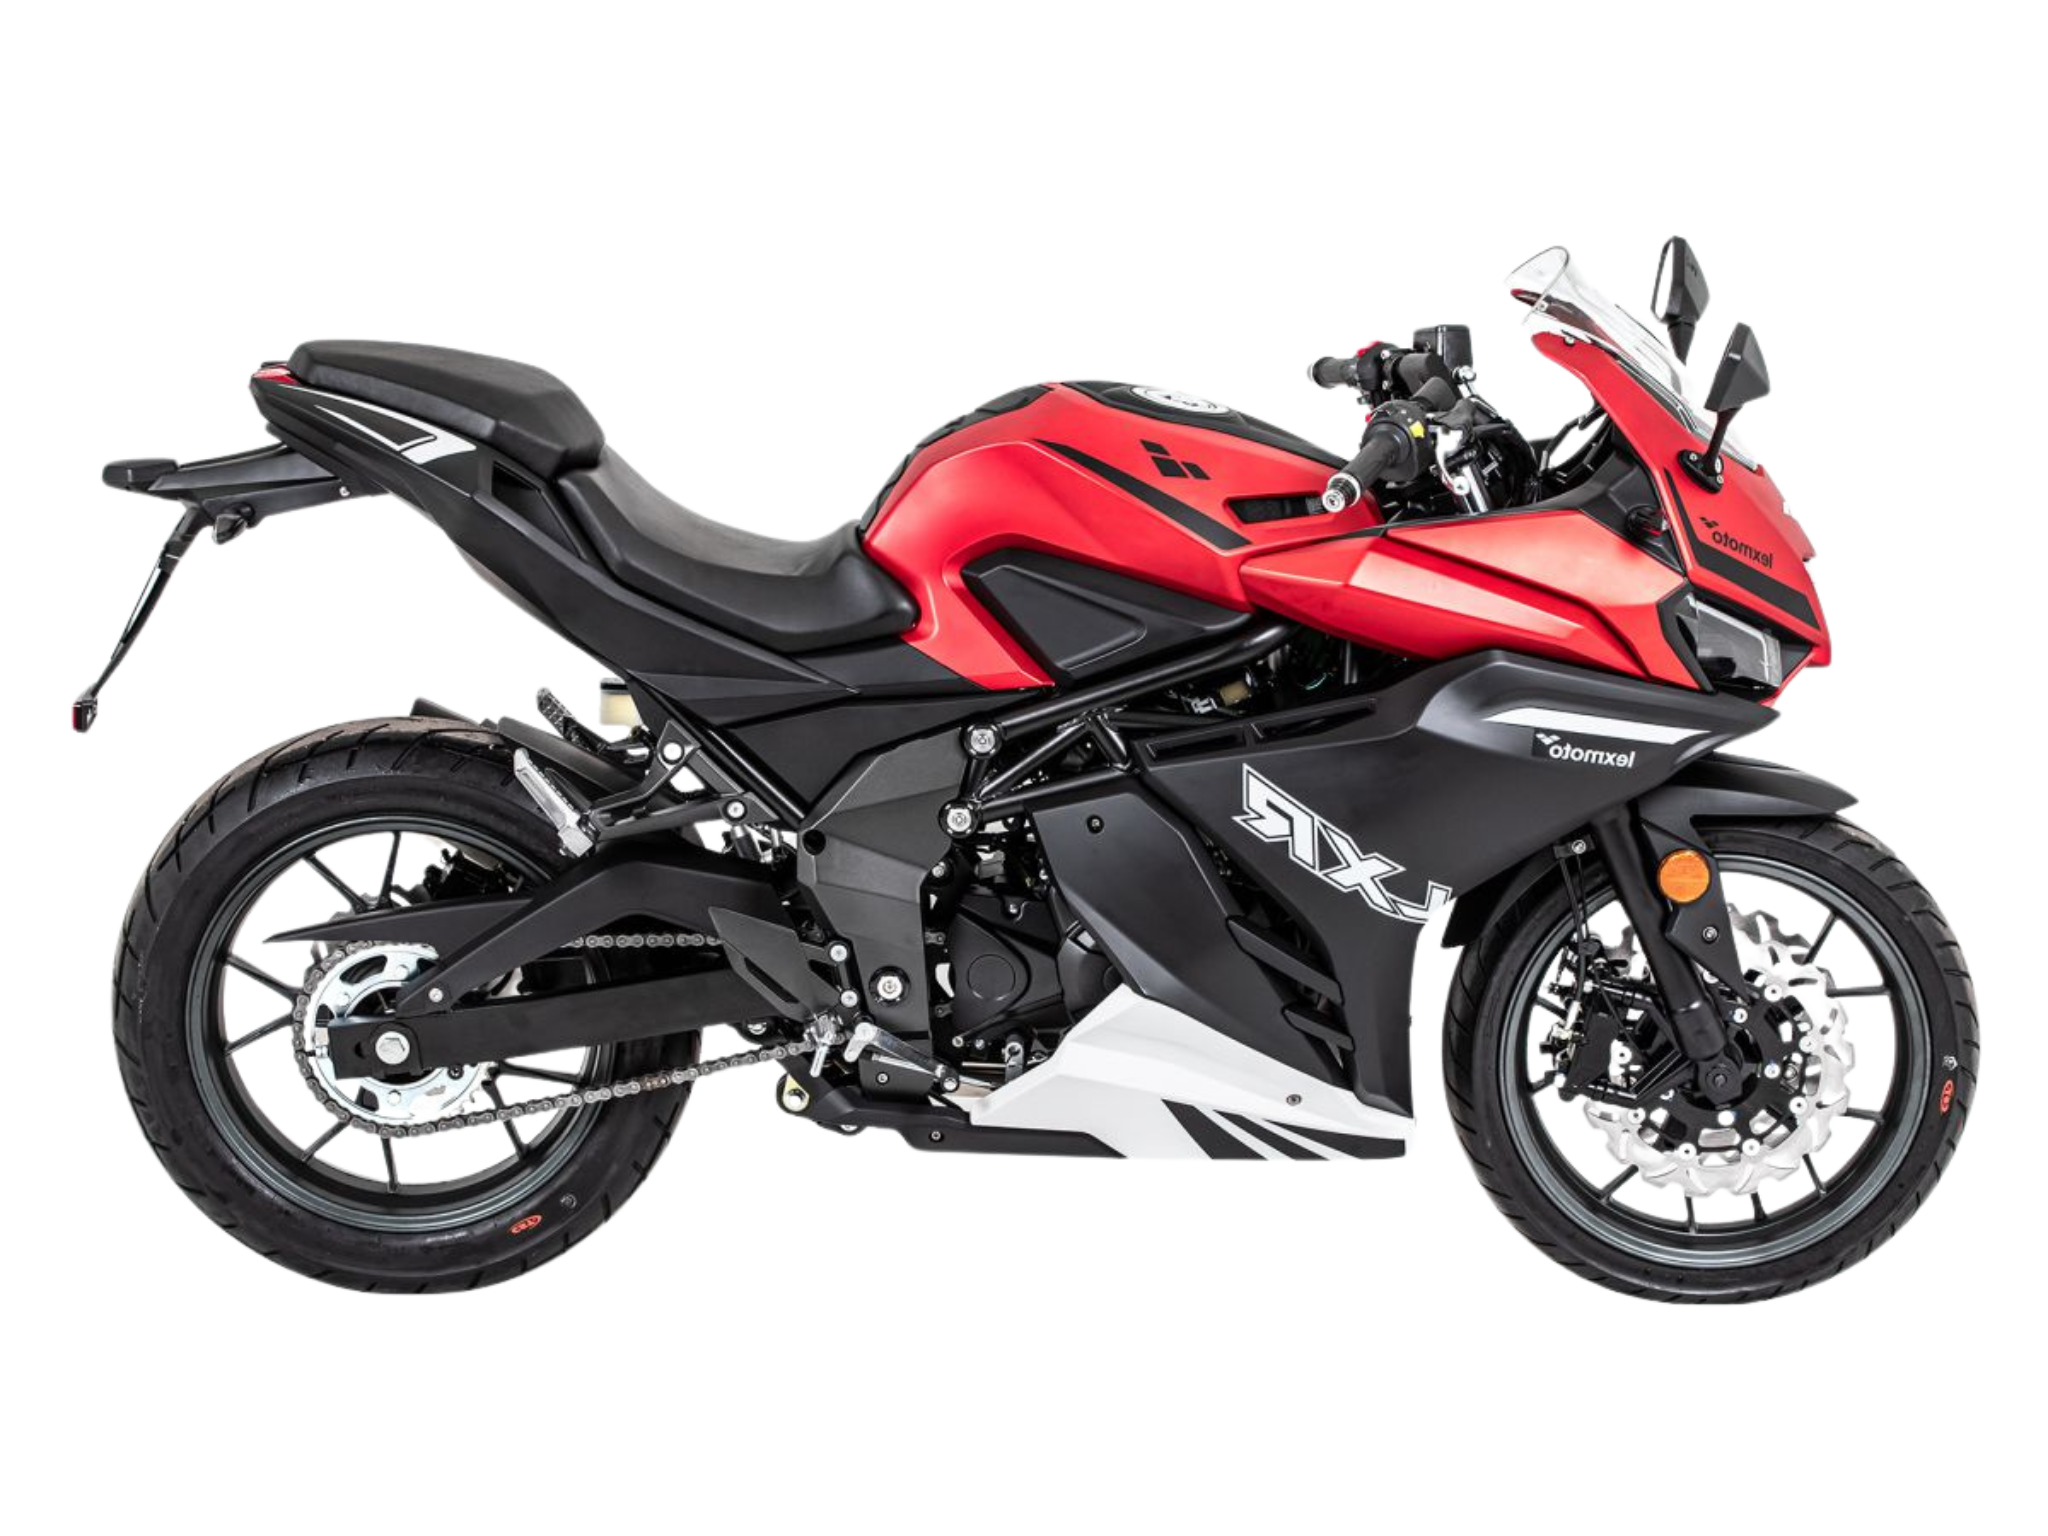 6. Lexmoto LXR125 (Sports Styling in a Very Affordable Package)